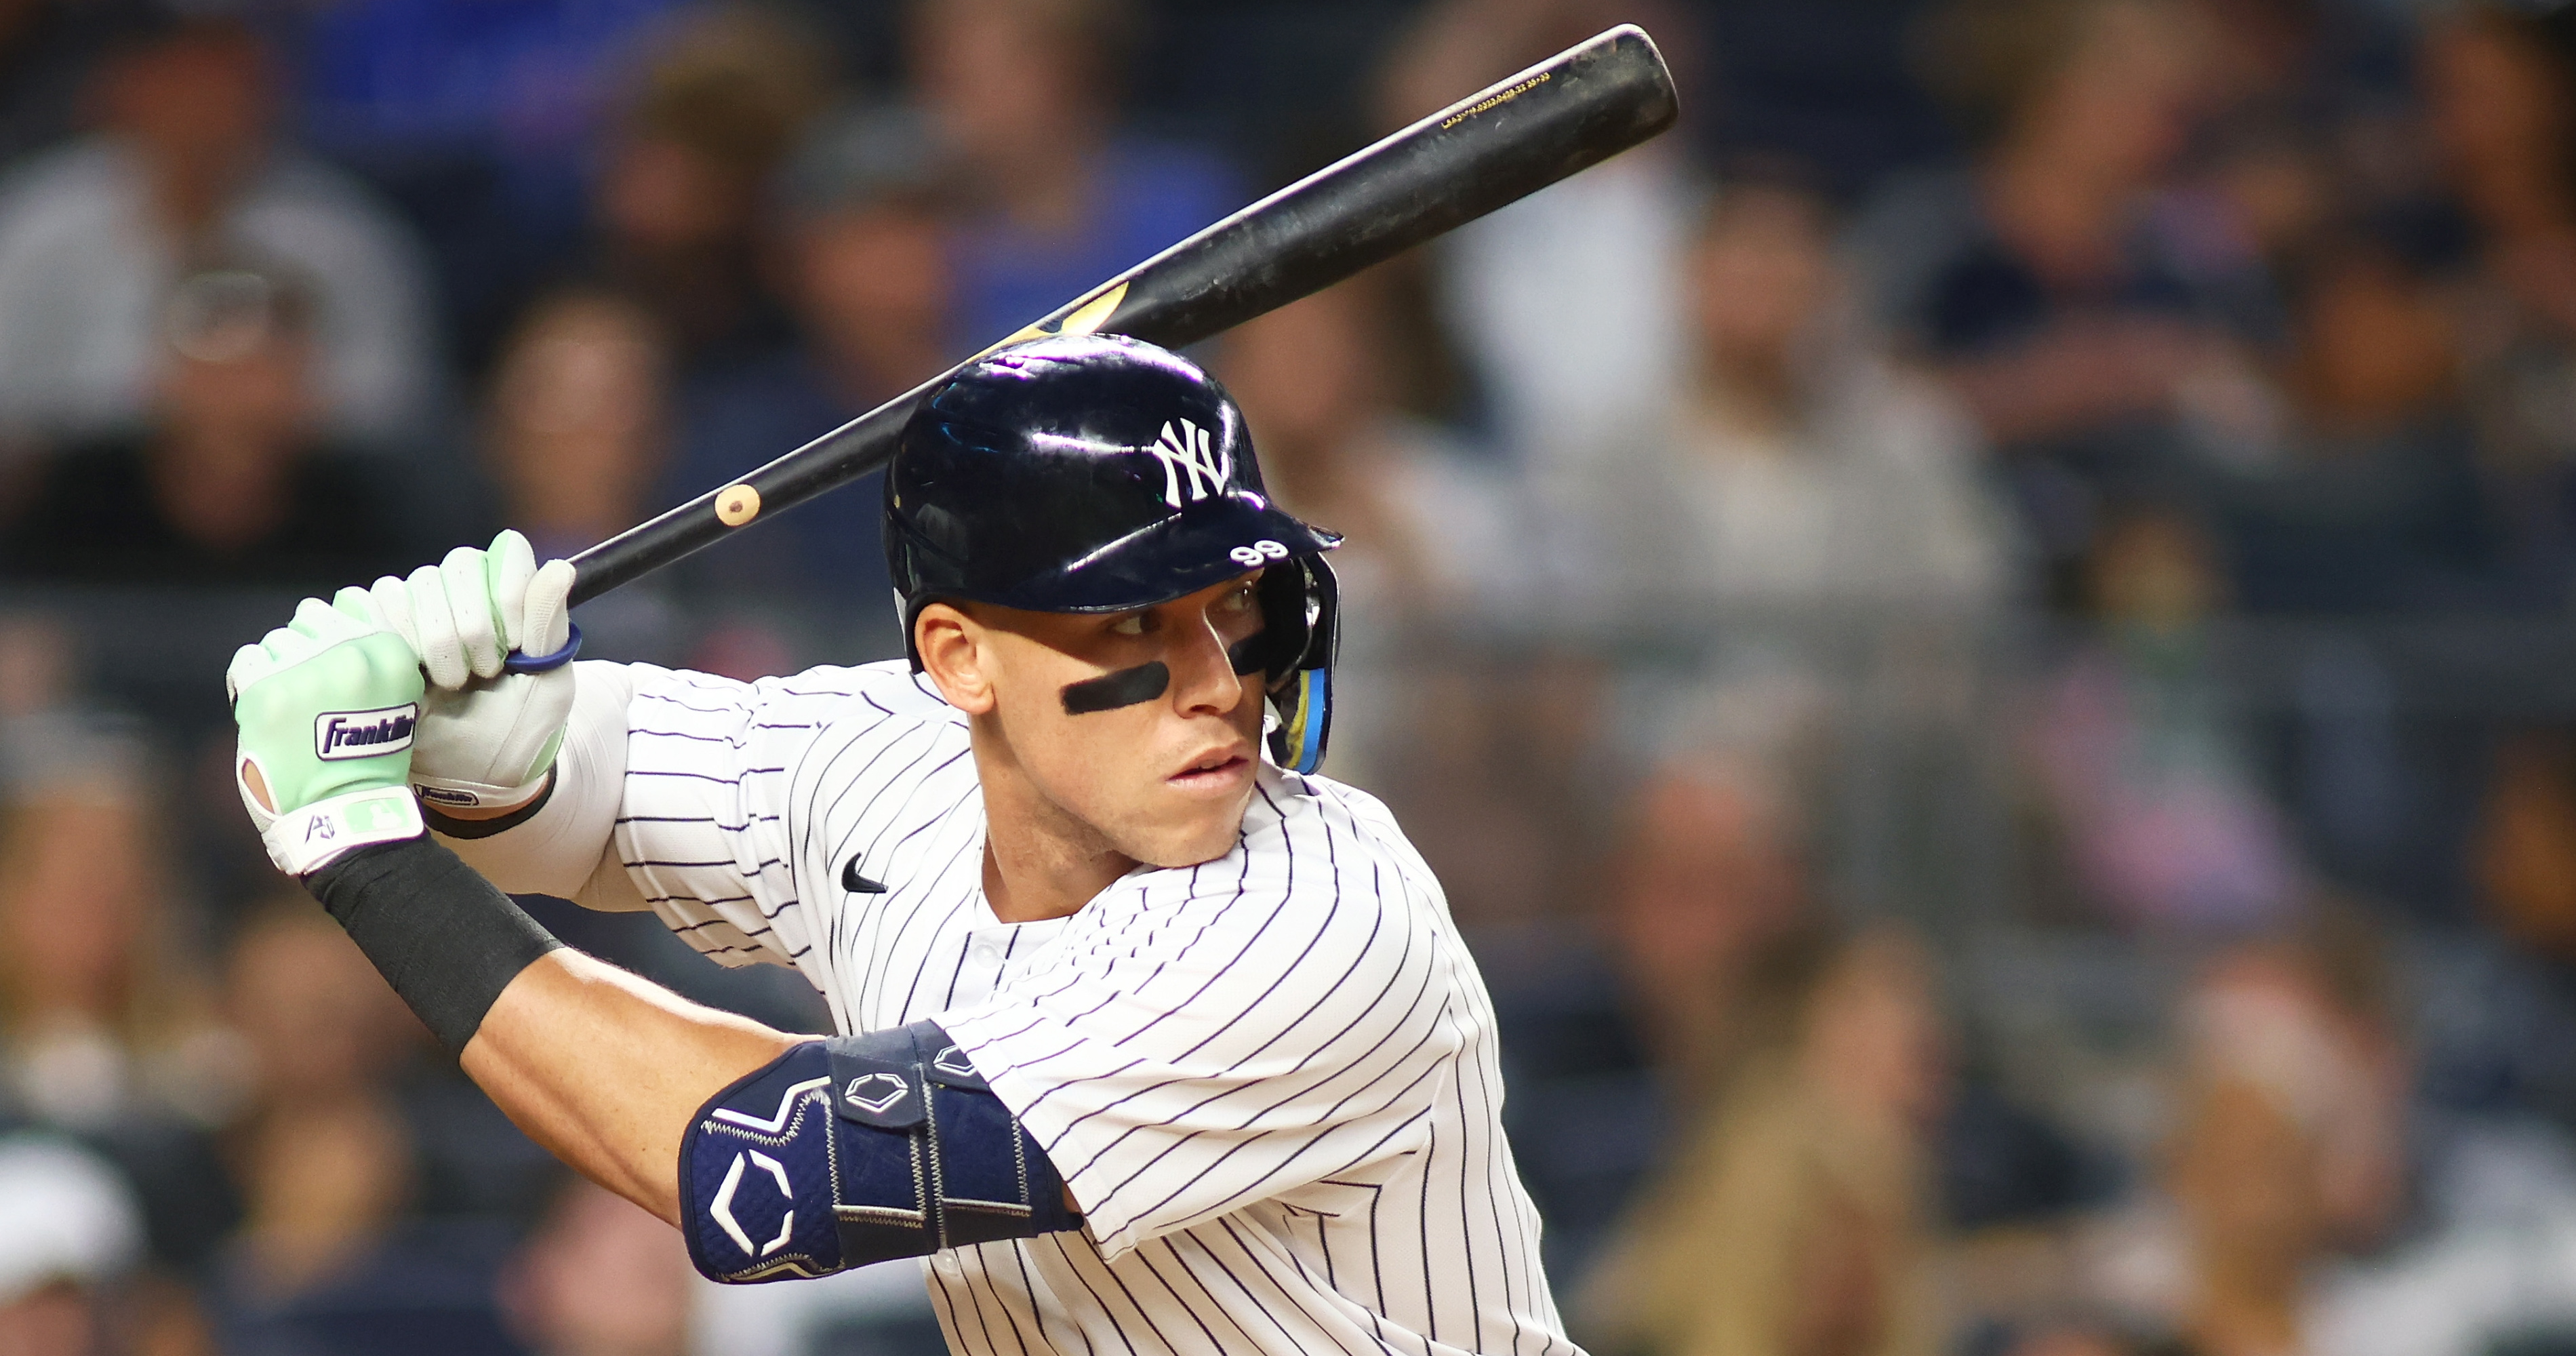 Aaron Judge's record home run pace for Yankees could surpass Roger